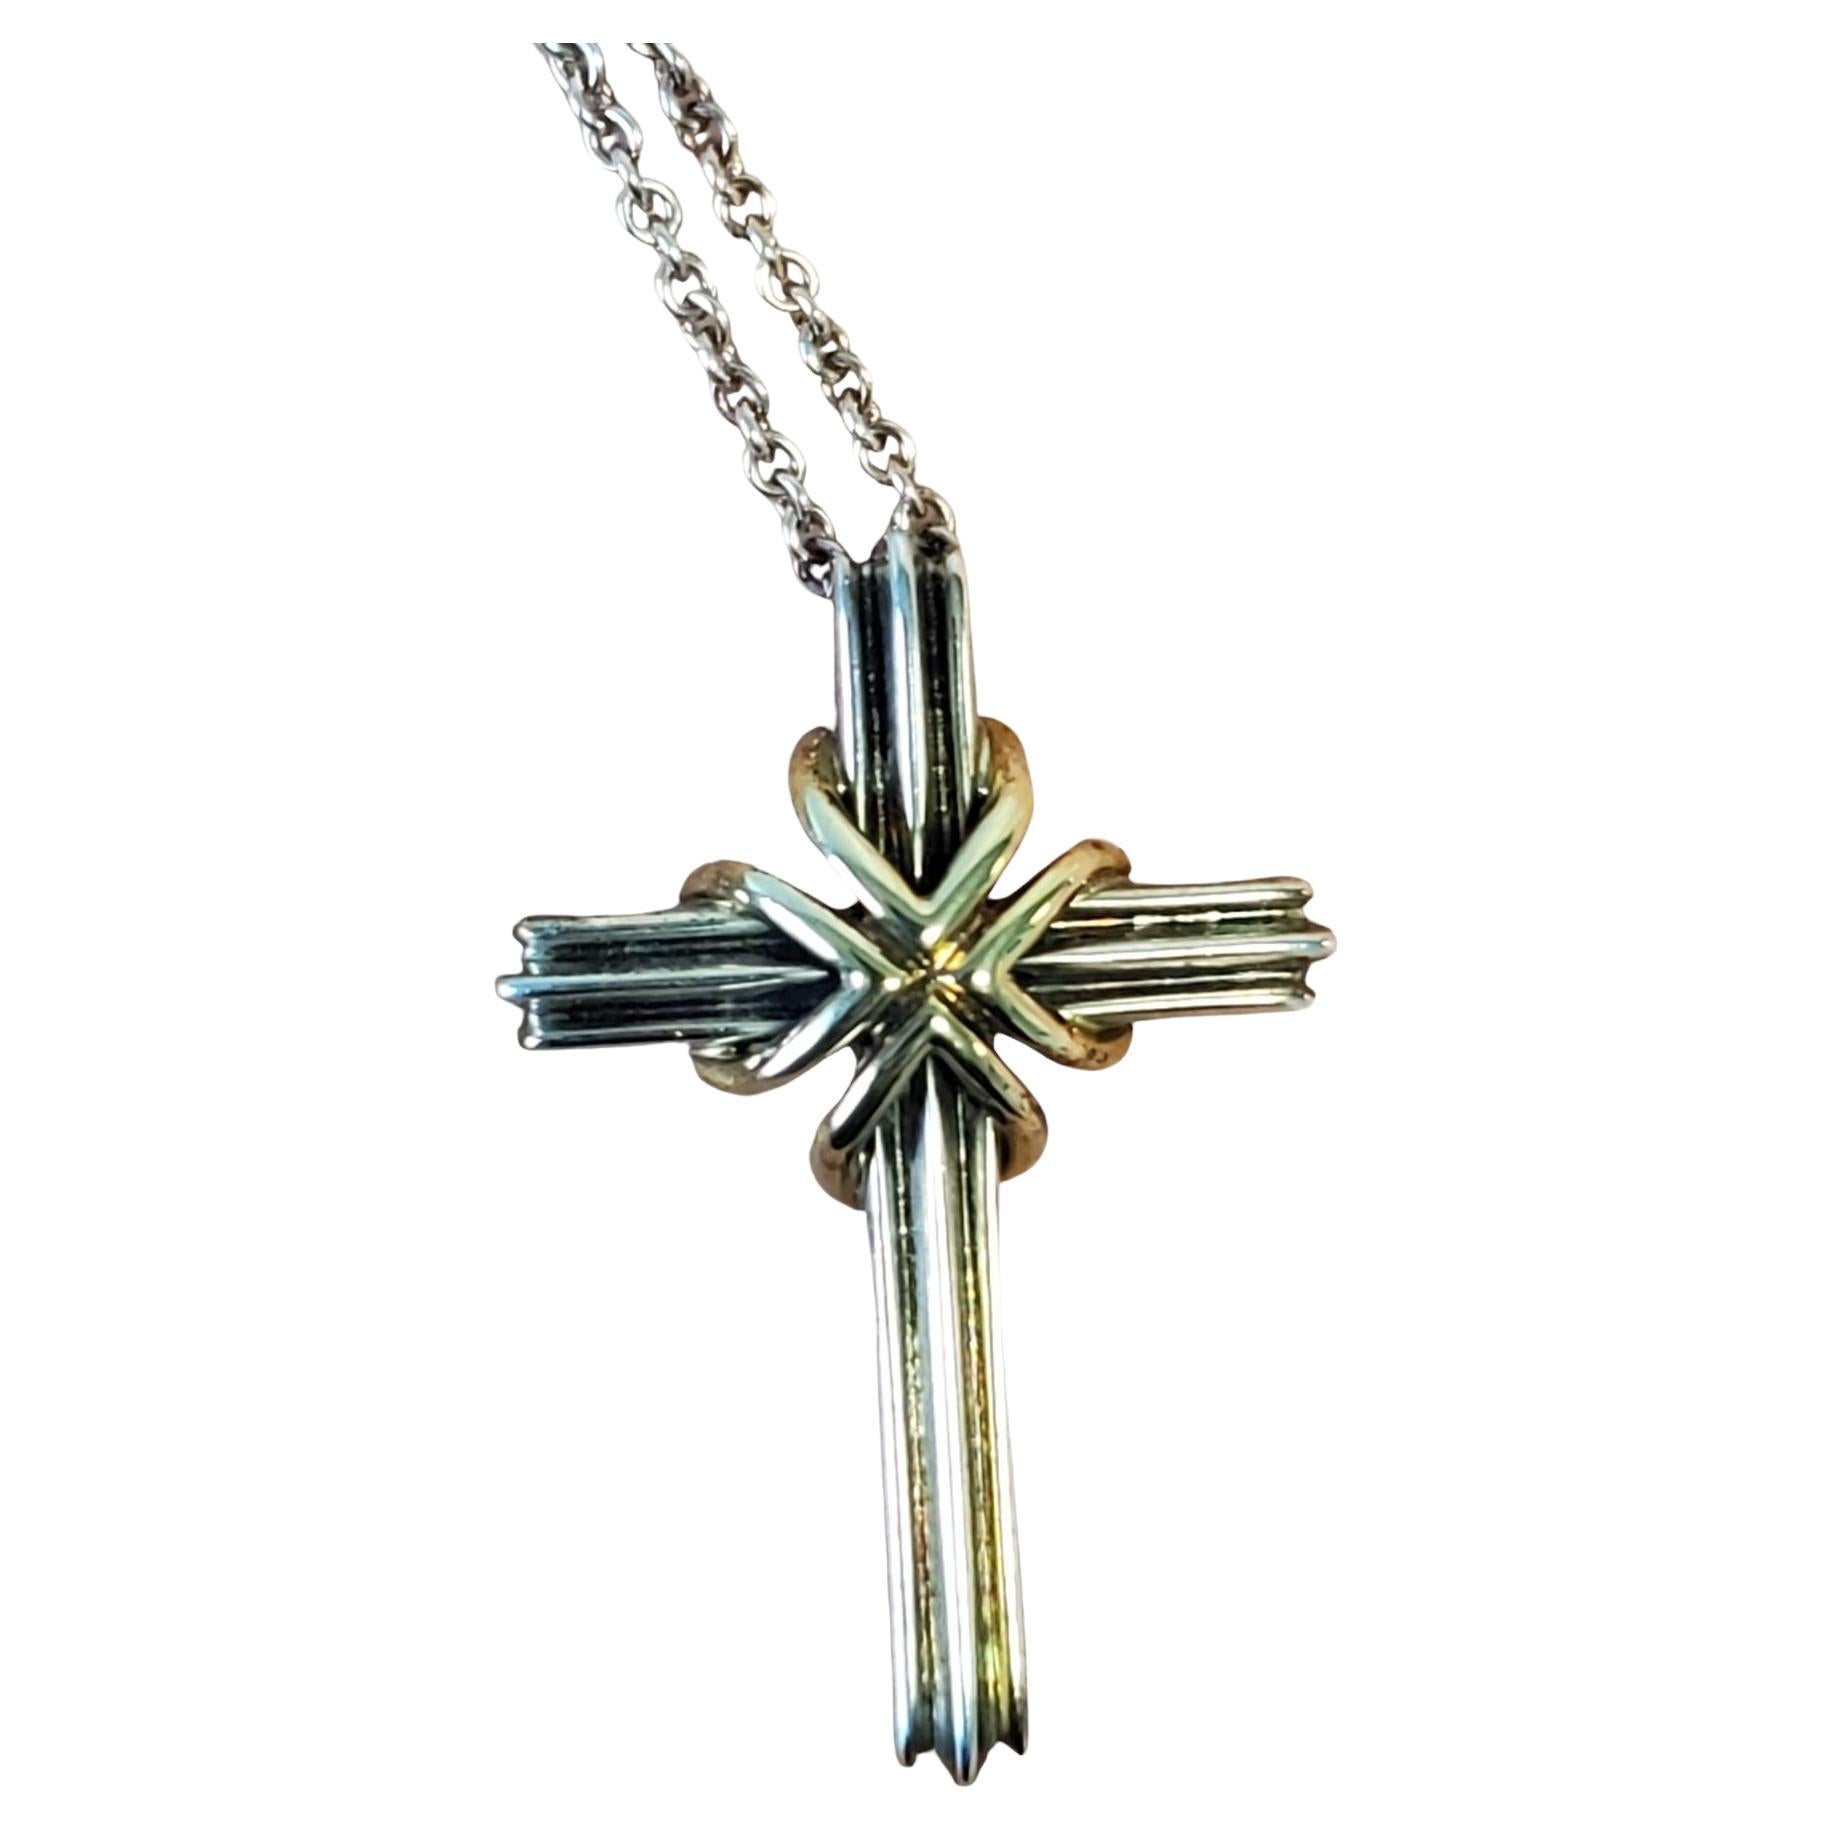 What is a necklace with a cross called?